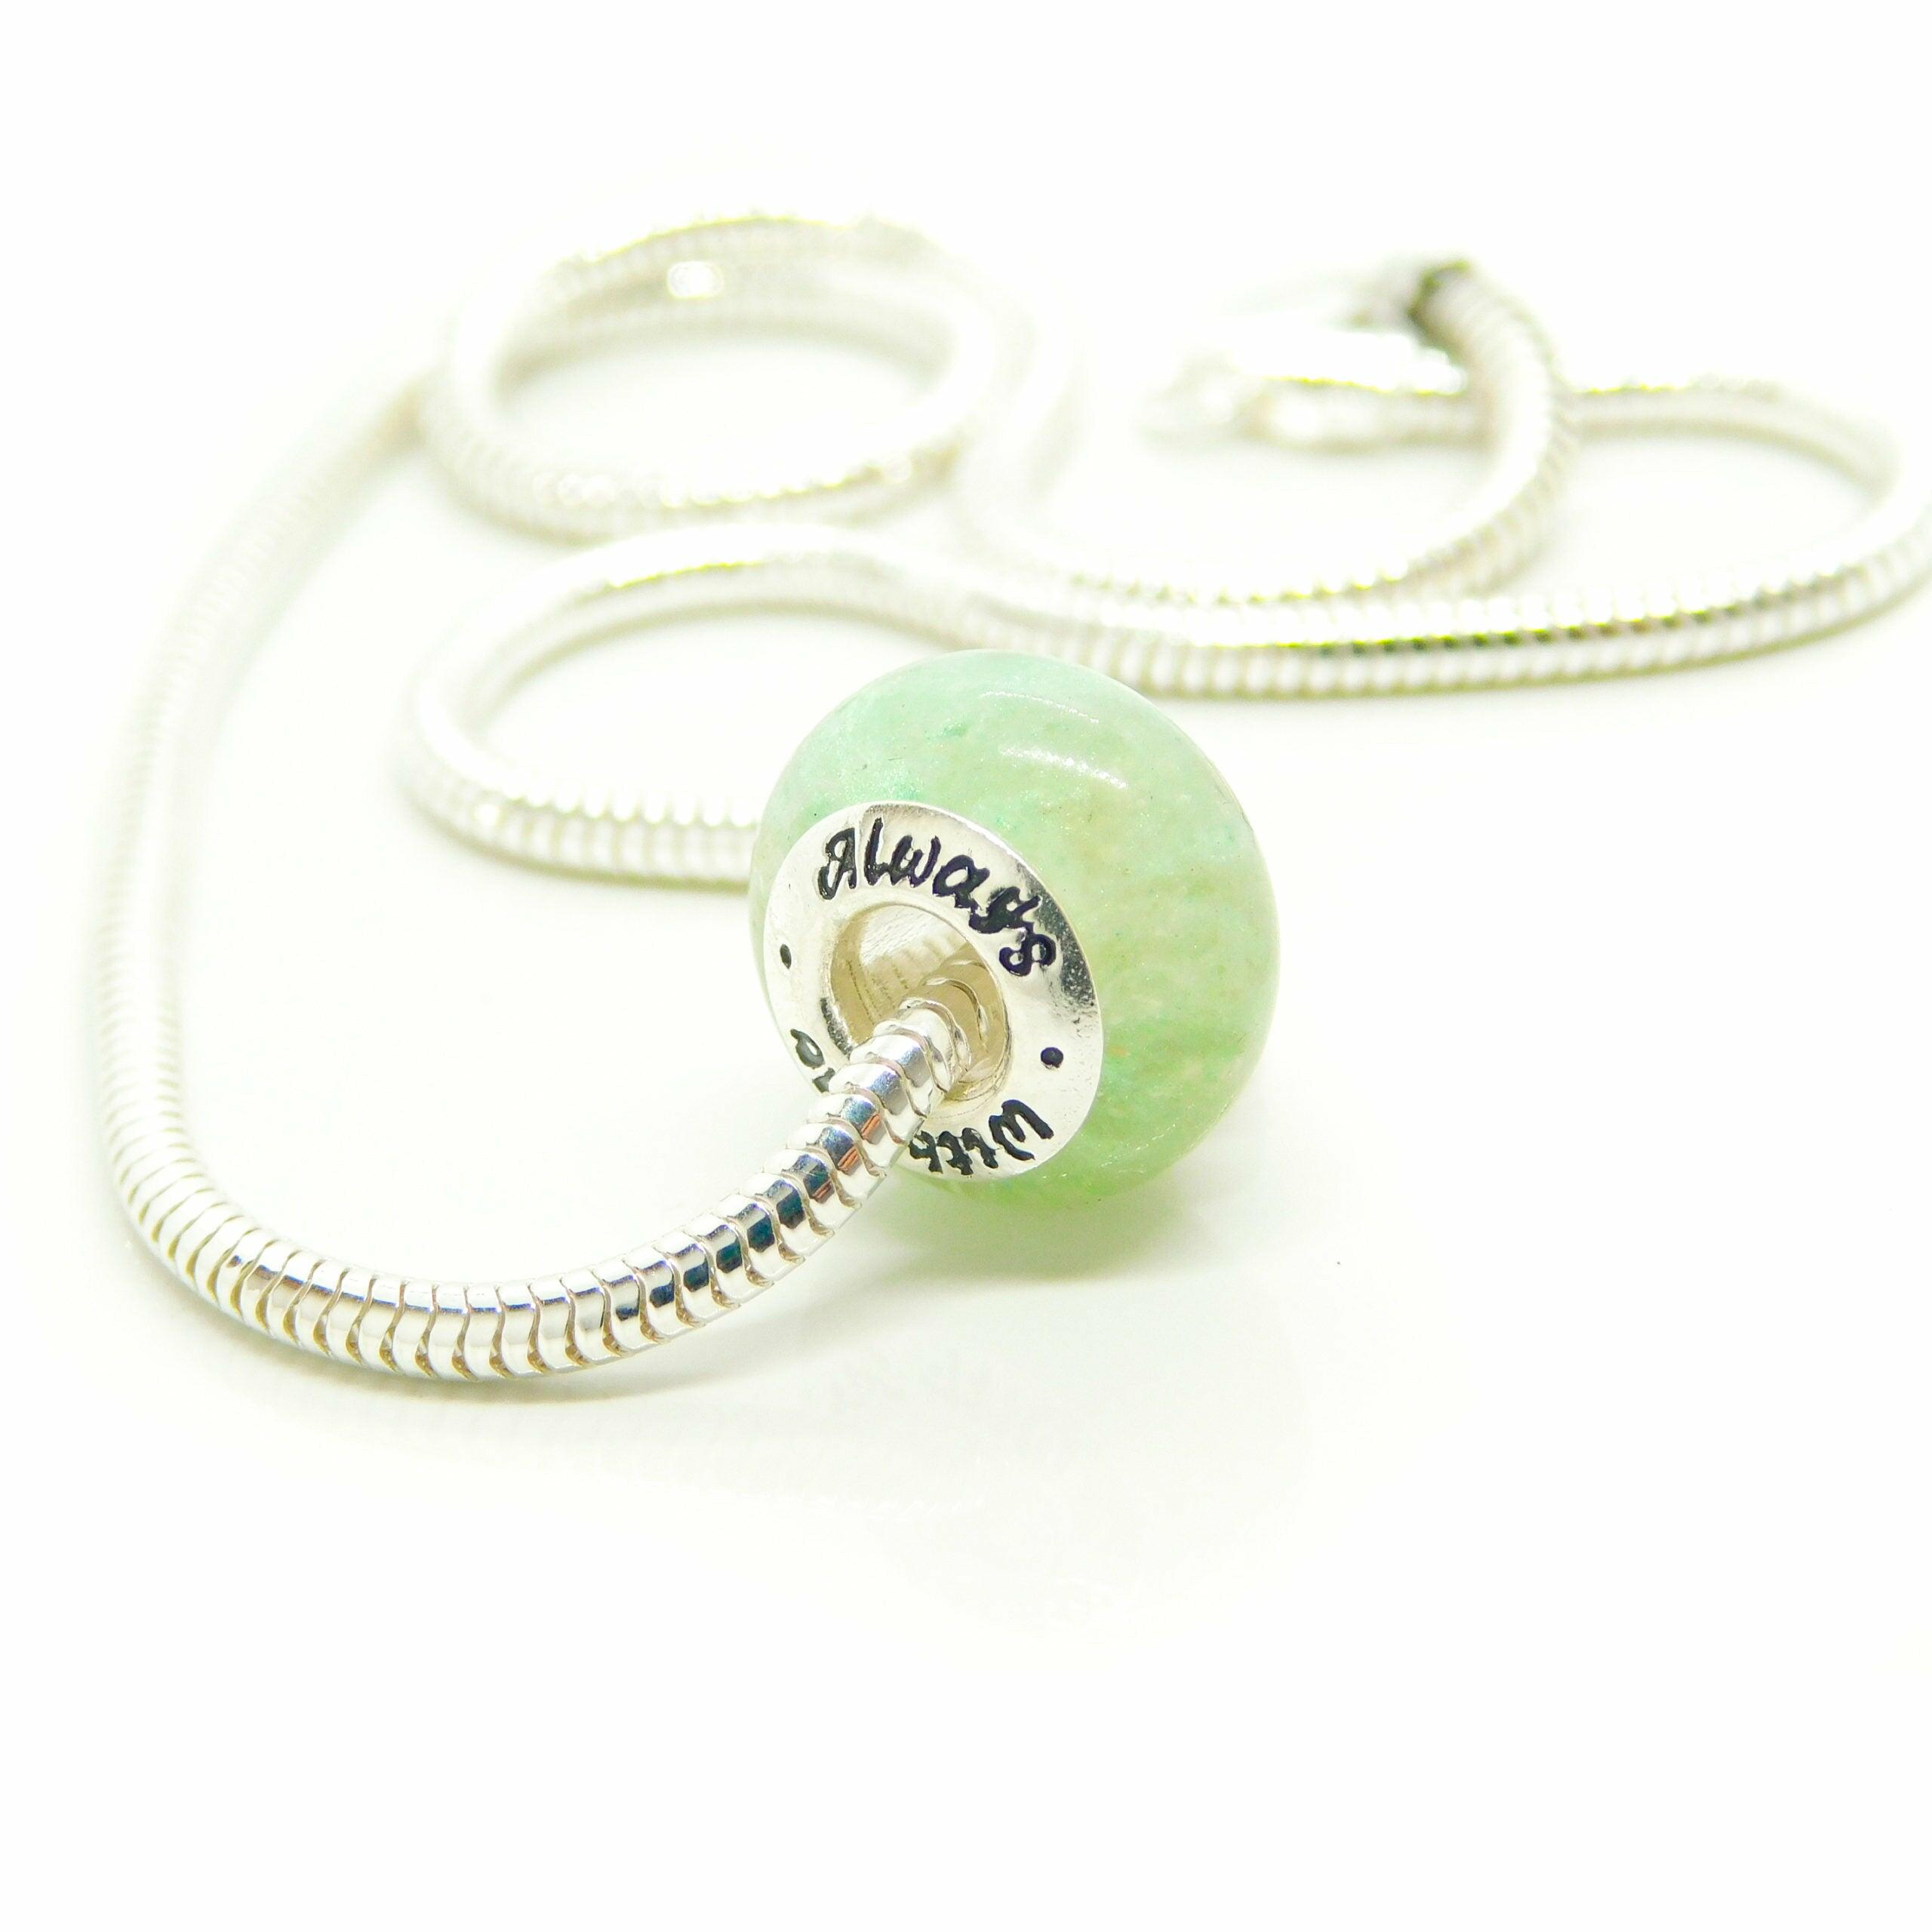 Circular Bead on Silver Snake Style Bracelet (Bracelet only for effect)with Silver Insert that fits Modern Style Bracelet's. Contains Cremation Ashes